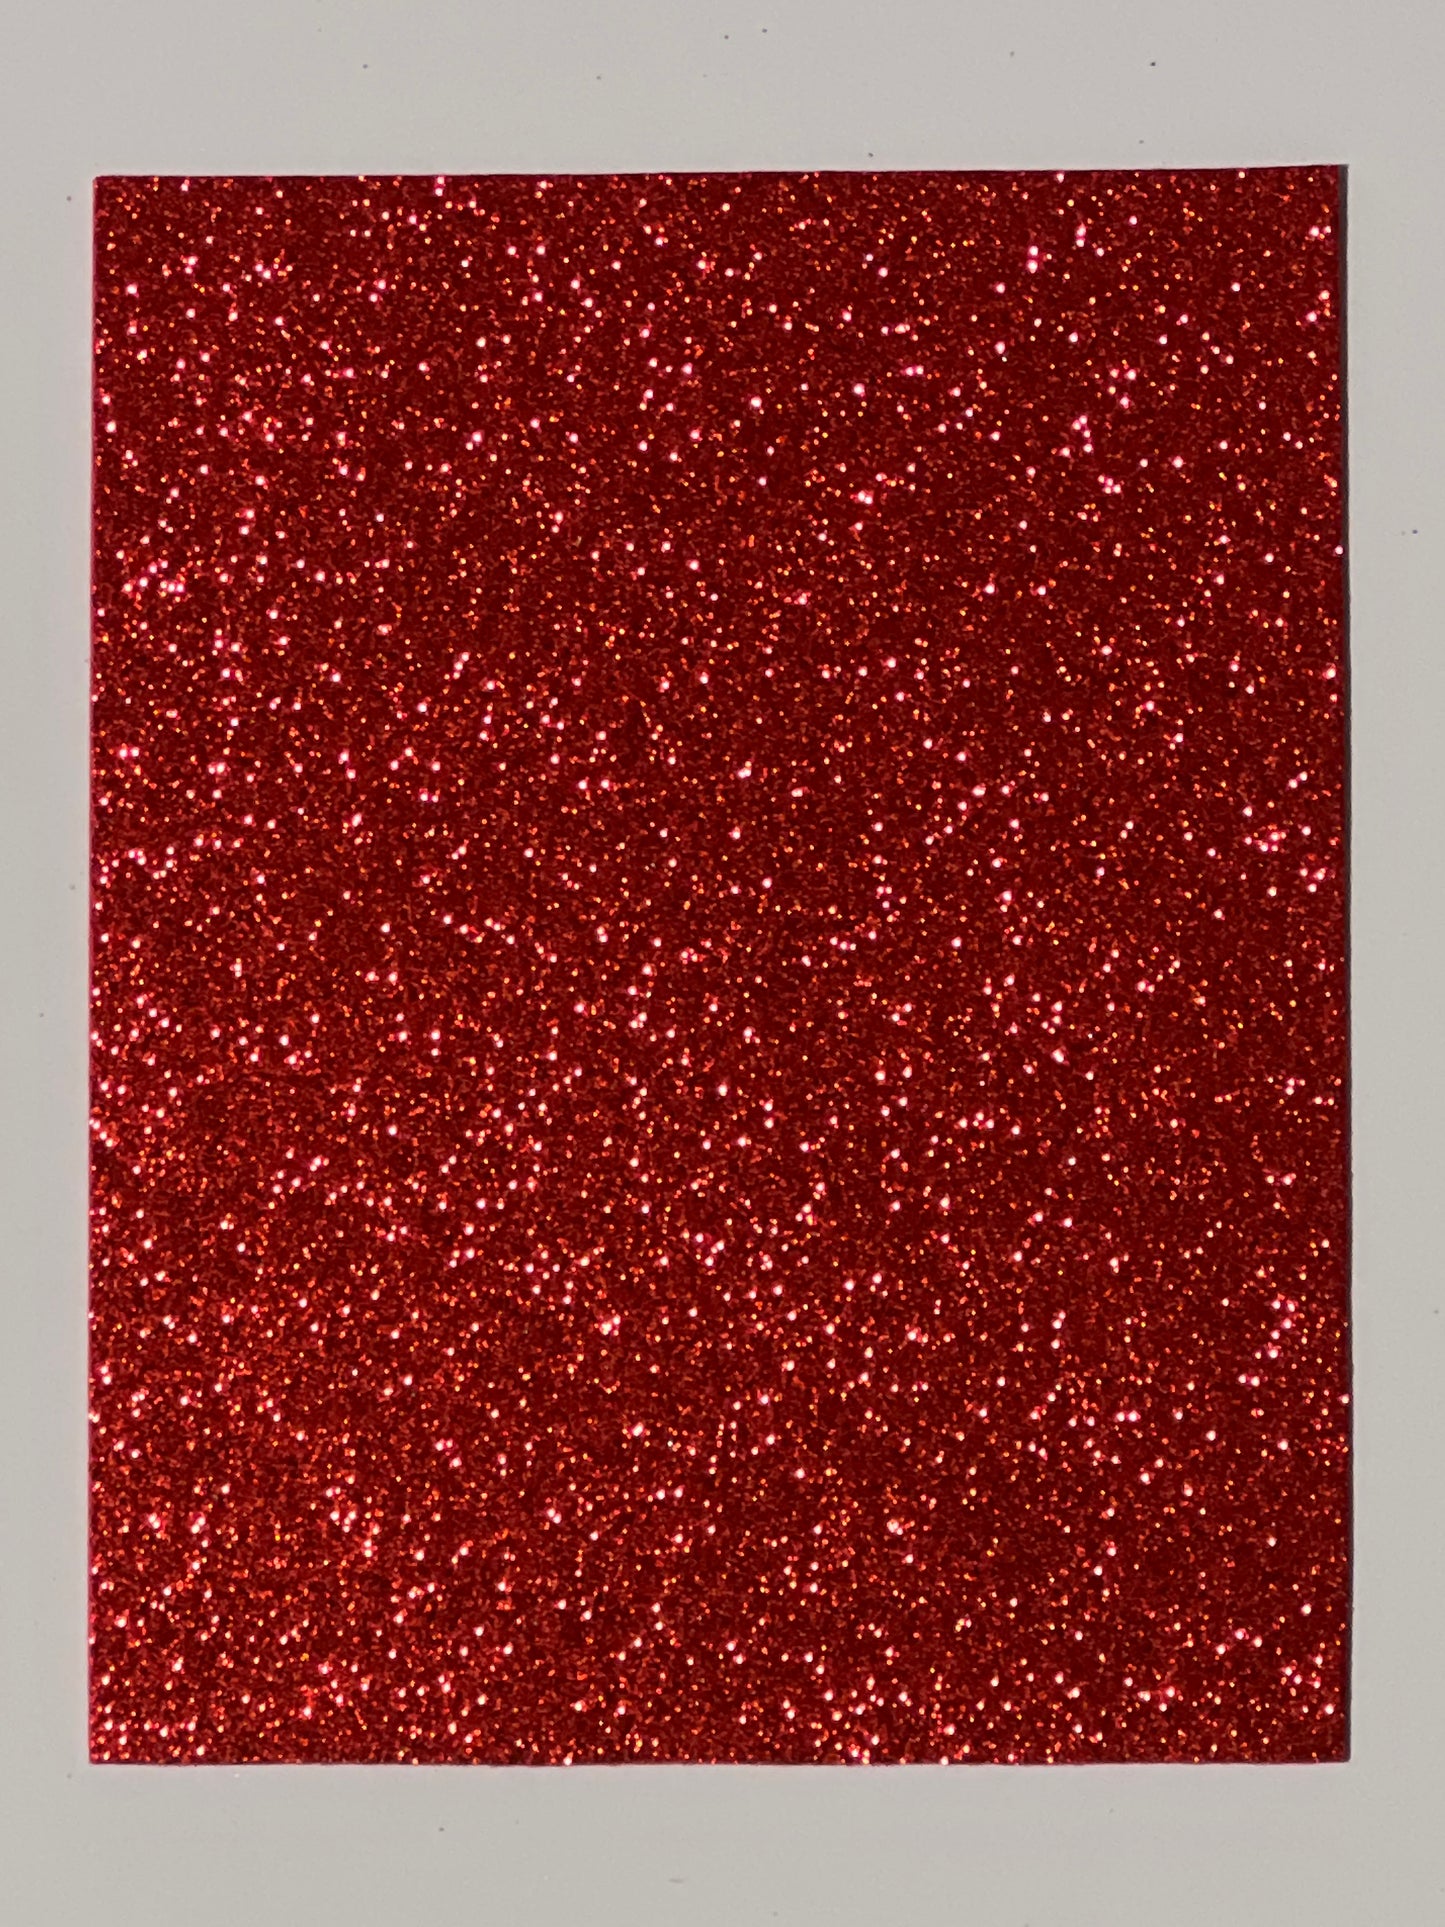 Craft Foam Glitter Red - Size Approx 16cm x 21cm - Thickness 2mm